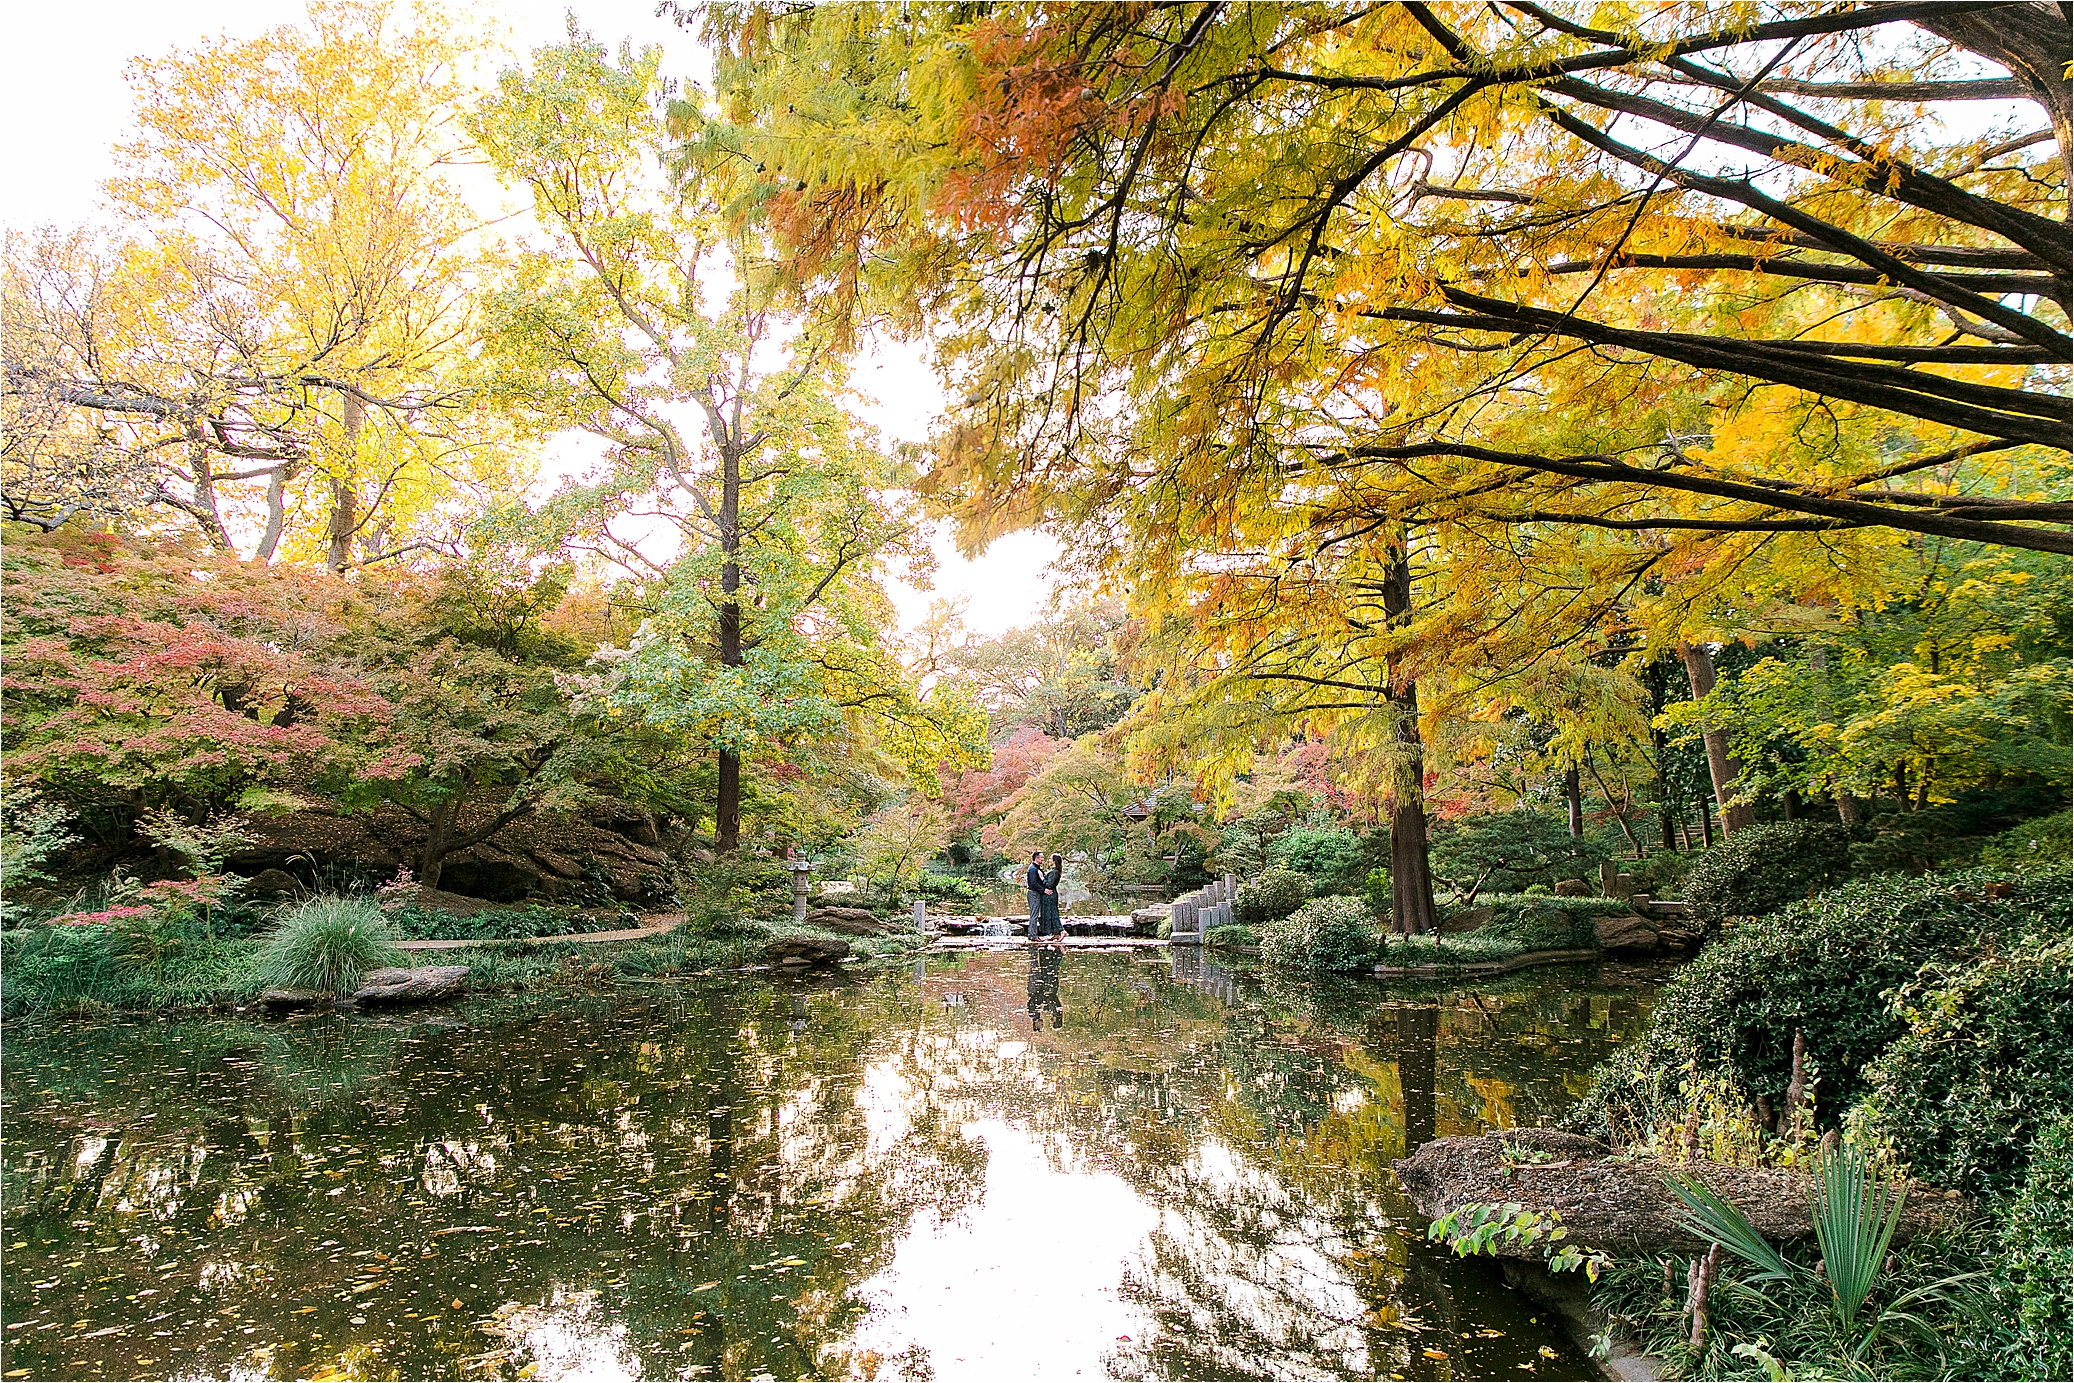 A wide photo of a couple embracing in front of pond among colorful trees at The Japanese Gardens inside the Fort Worth Botanic Garden 